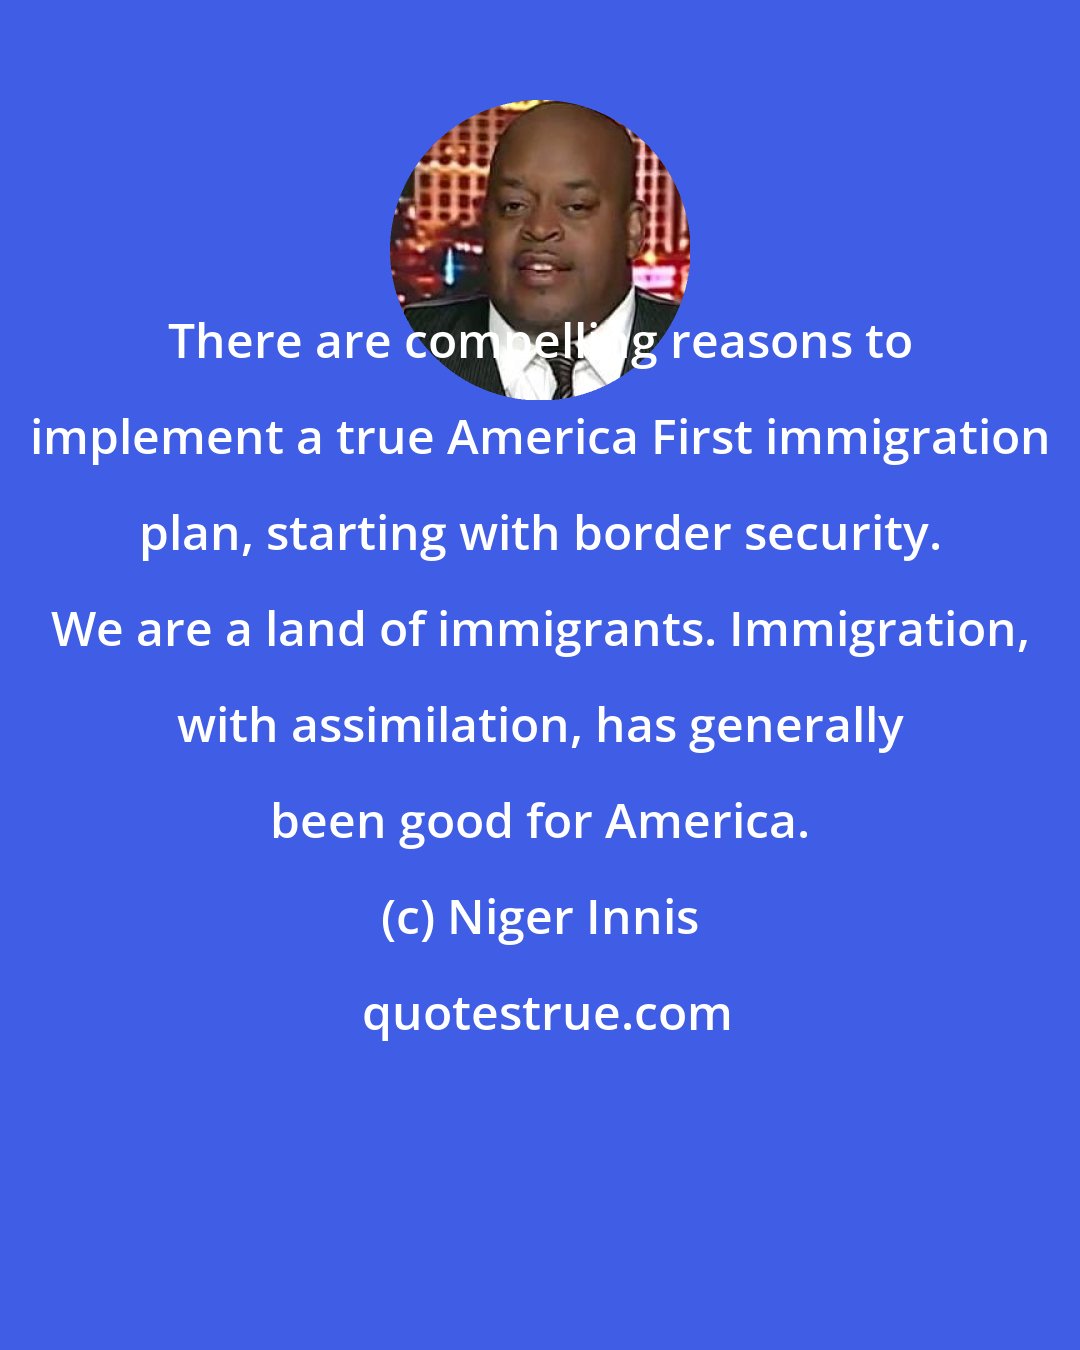 Niger Innis: There are compelling reasons to implement a true America First immigration plan, starting with border security. We are a land of immigrants. Immigration, with assimilation, has generally been good for America.